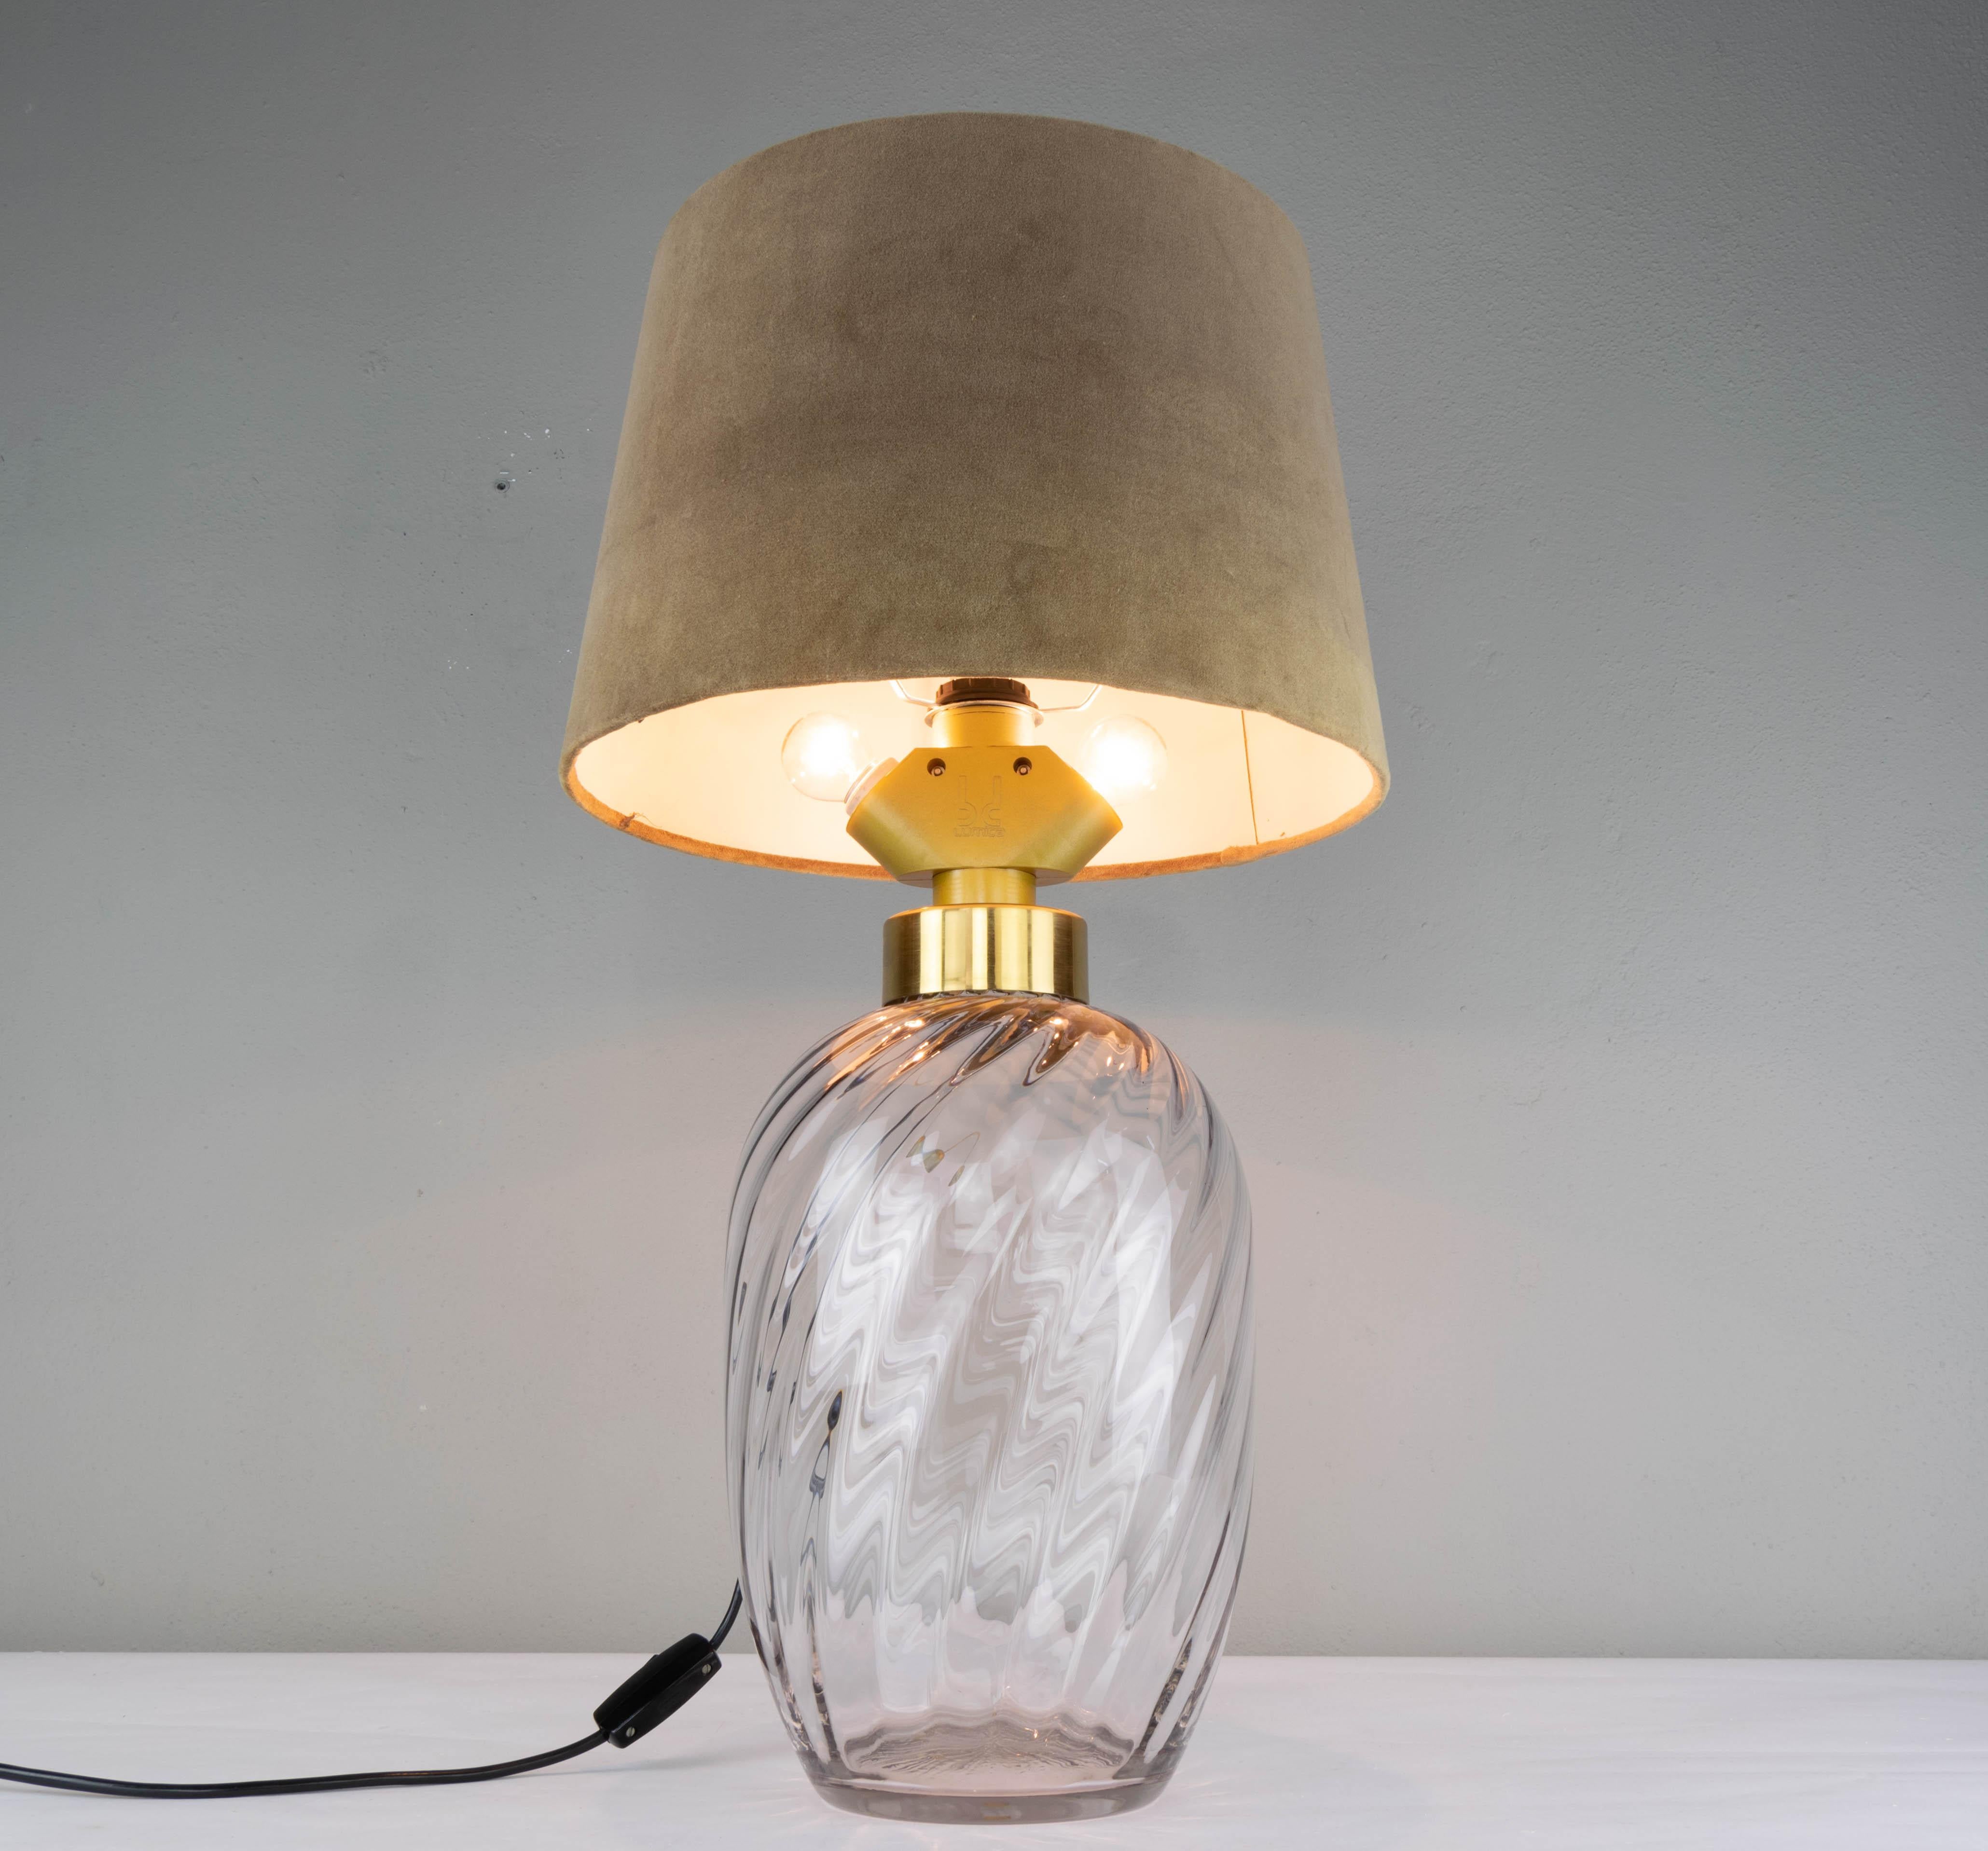 Table lamp produced by the Spanish firm Lumica in the 1970s. Blown glass body. Golden lampholder with brass finishes with three E27 sockets that allows you to light 1, 2 or 3 bulbs through a 